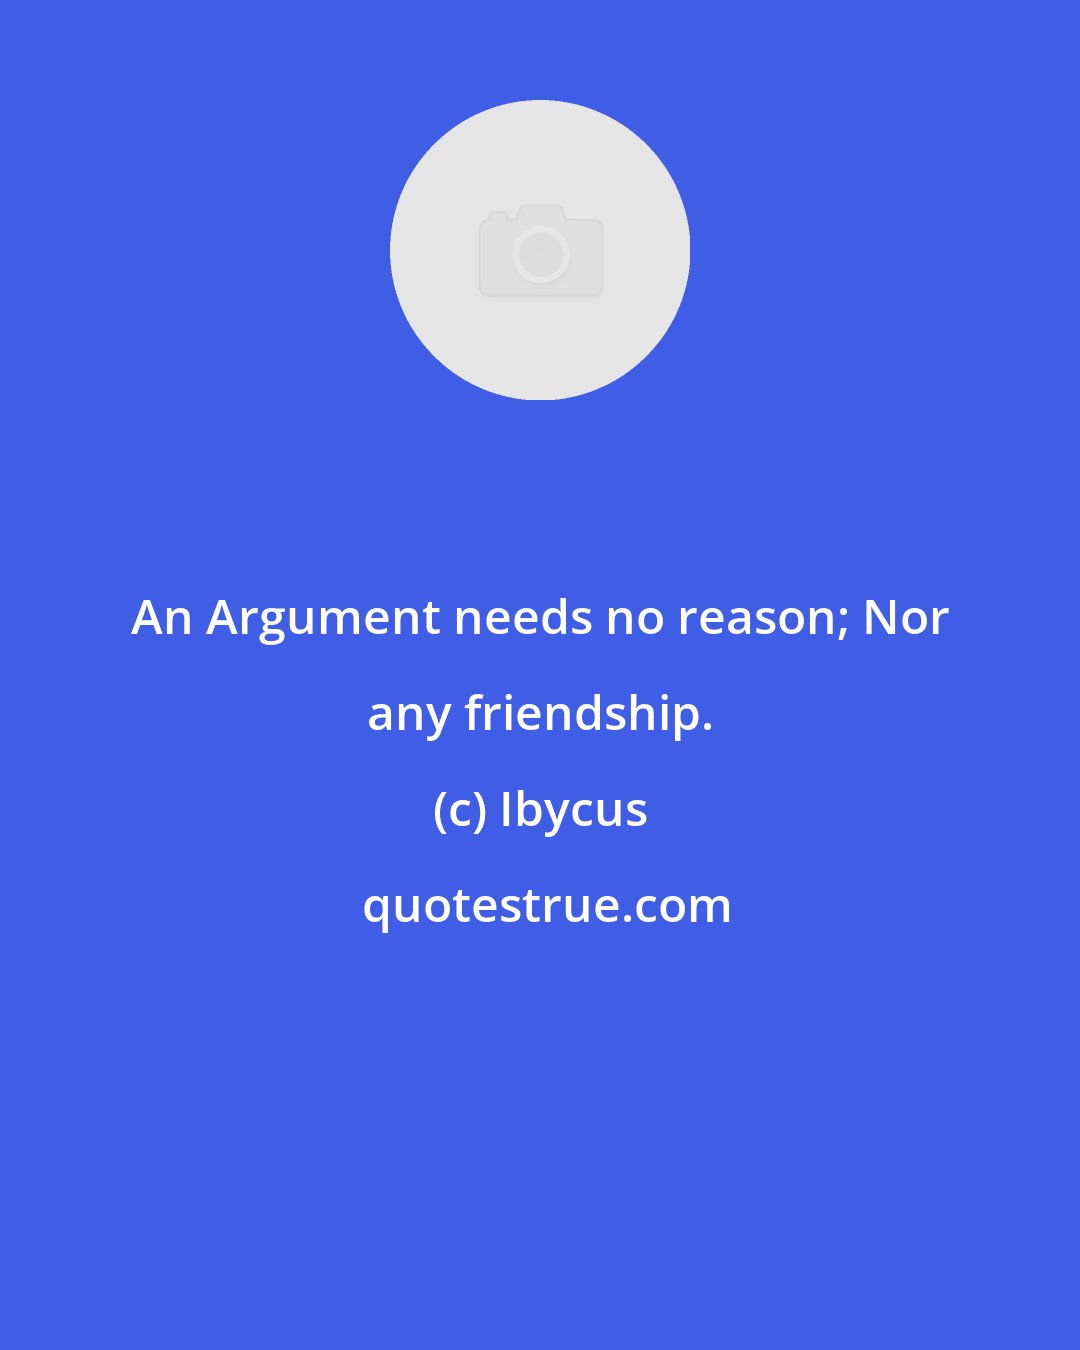 Ibycus: An Argument needs no reason; Nor any friendship.